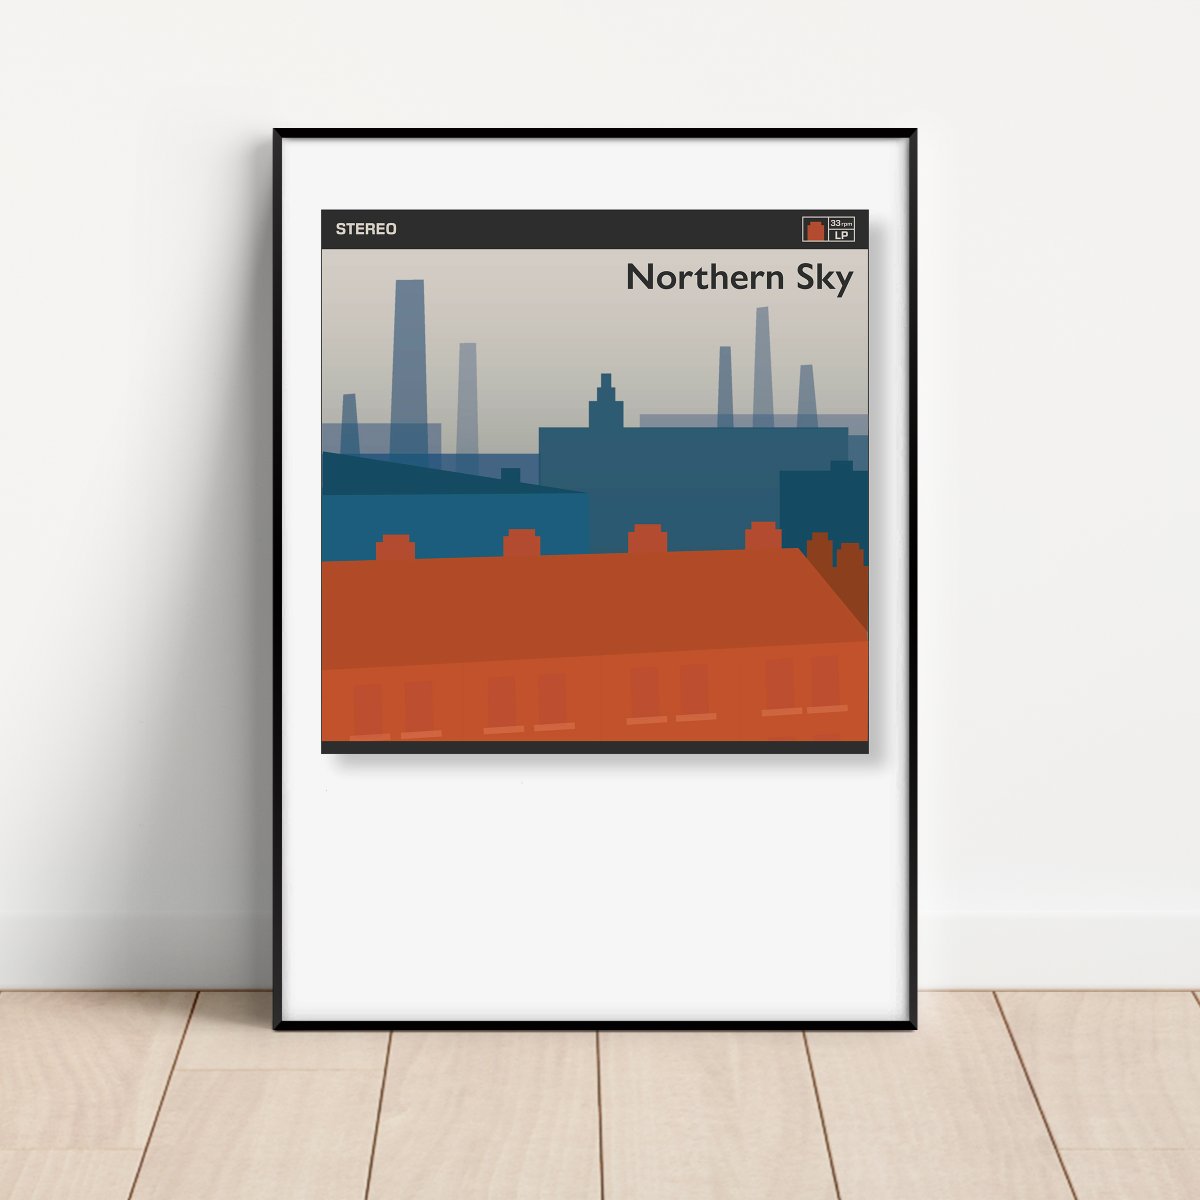 Aw reet! Seeing as it’s #LancashireDay I’m going to give away a Northern Sky A4 print. Inspired by my hometown of Blackburn and the Nick Drake song. Retweet and follow me to enter. I’ll pick a winner after 9pm (27 Nov) gailmyerscough.co.uk/product-page/n…